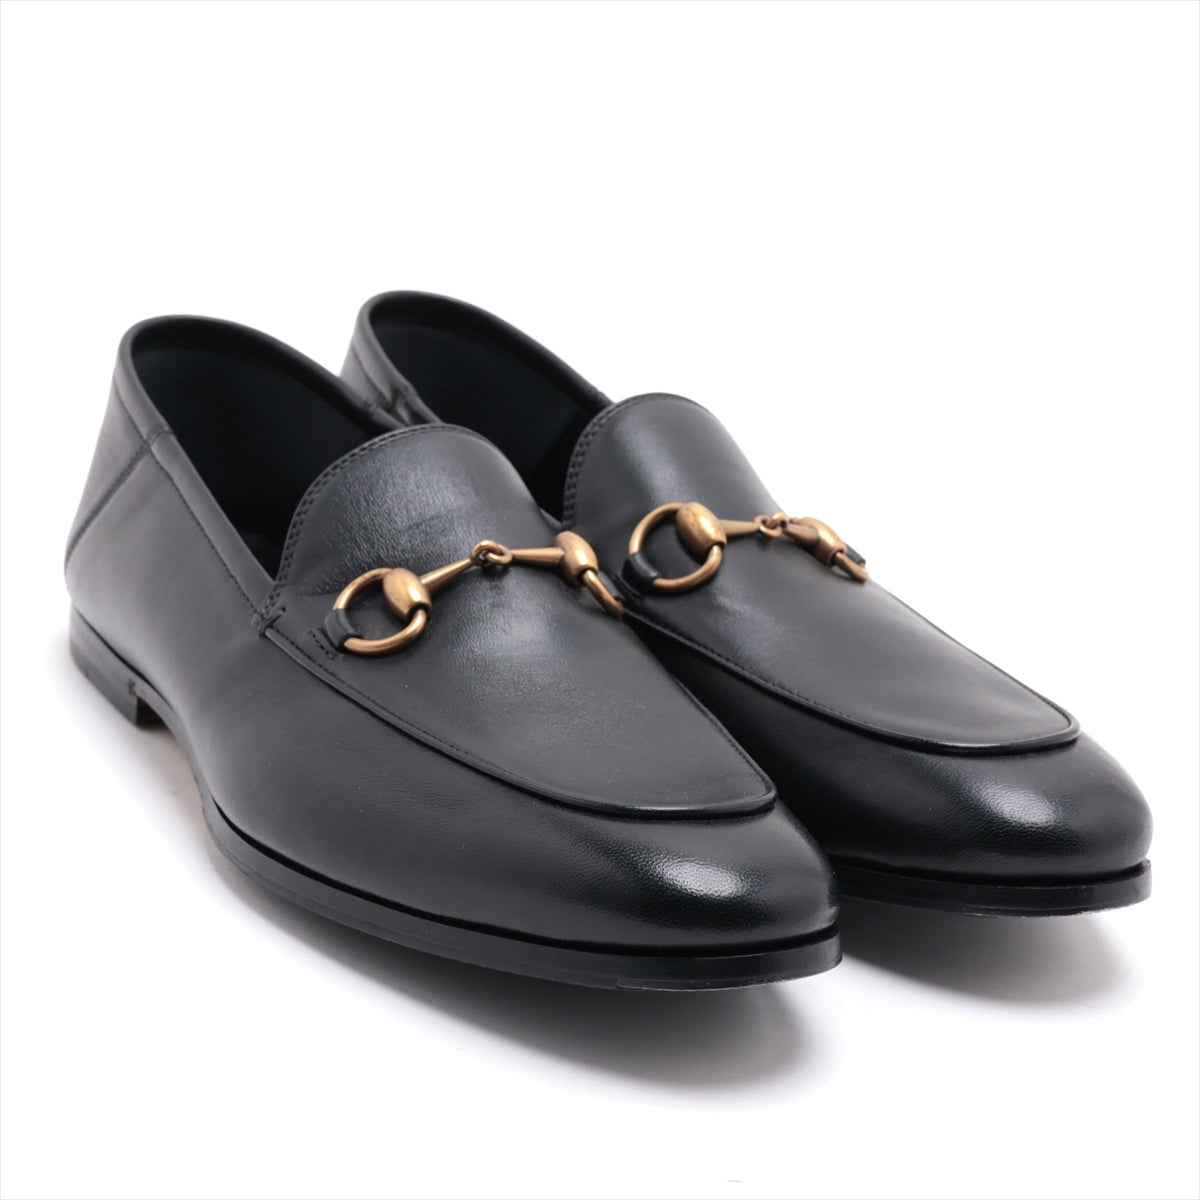 Gucci Brixton Leather Loafer 7 Men's Black 407314 Horse Bits box There is a storage bag